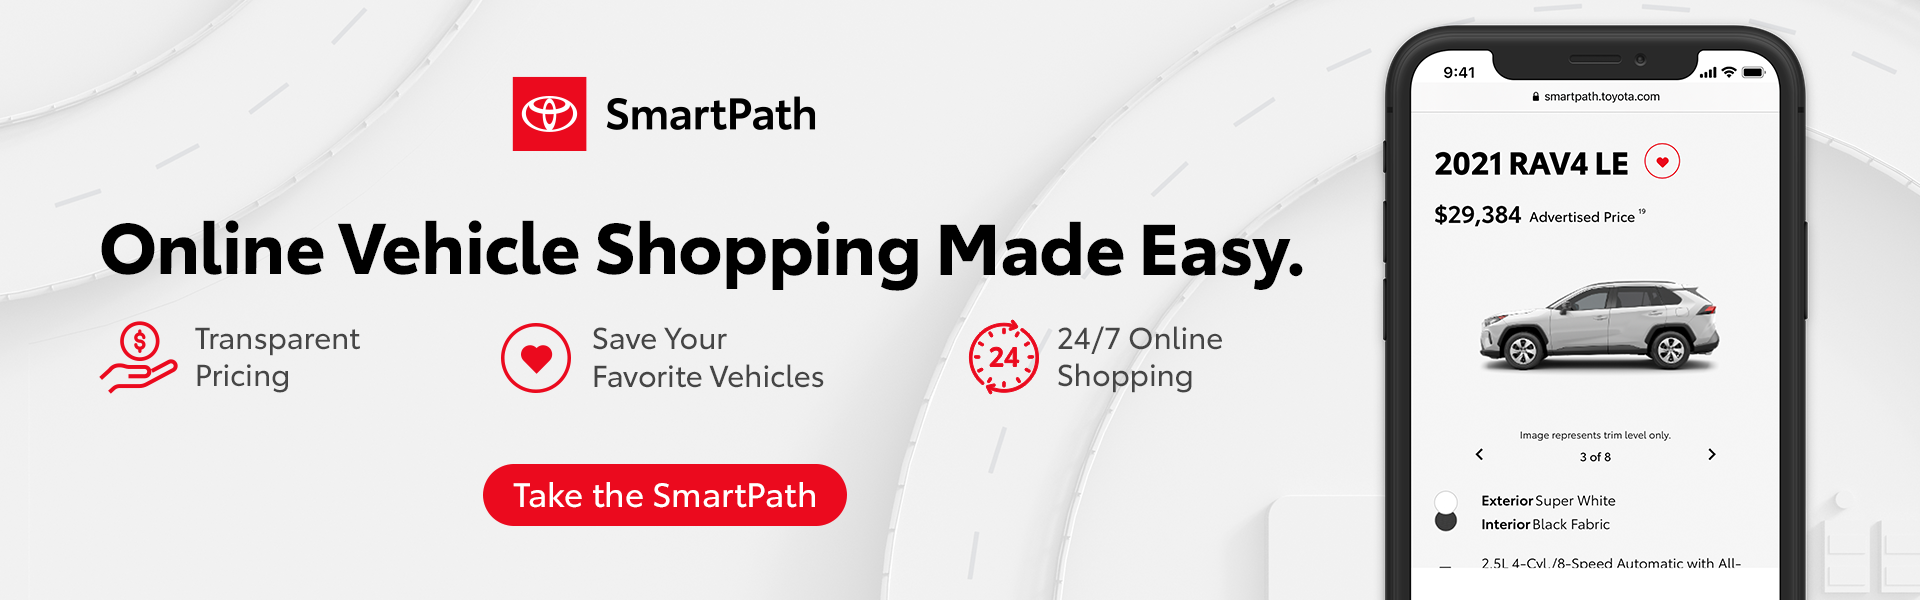 Toyota SmartPath - Online Vehicle Shopping Made Easy